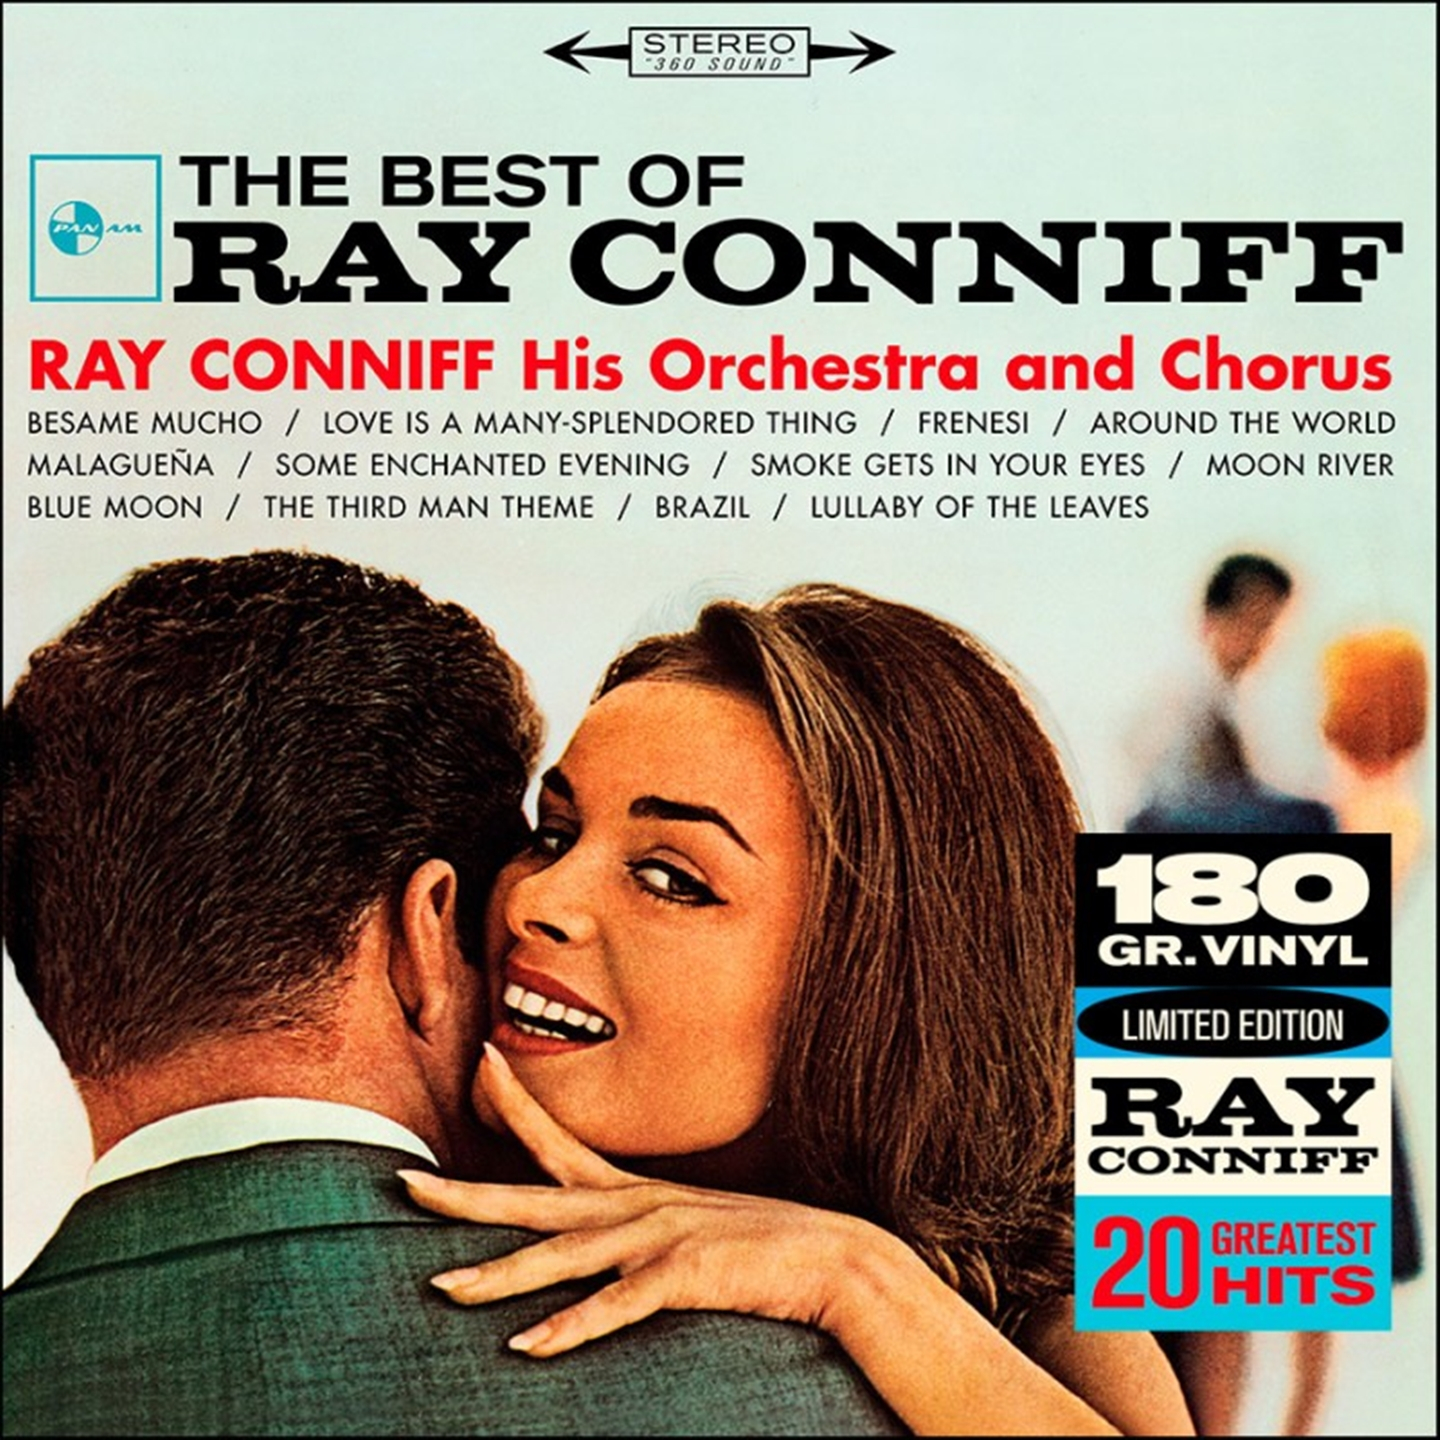 THE BEST OF RAY CONNIFF - 20 GREATEST HITS [LP]